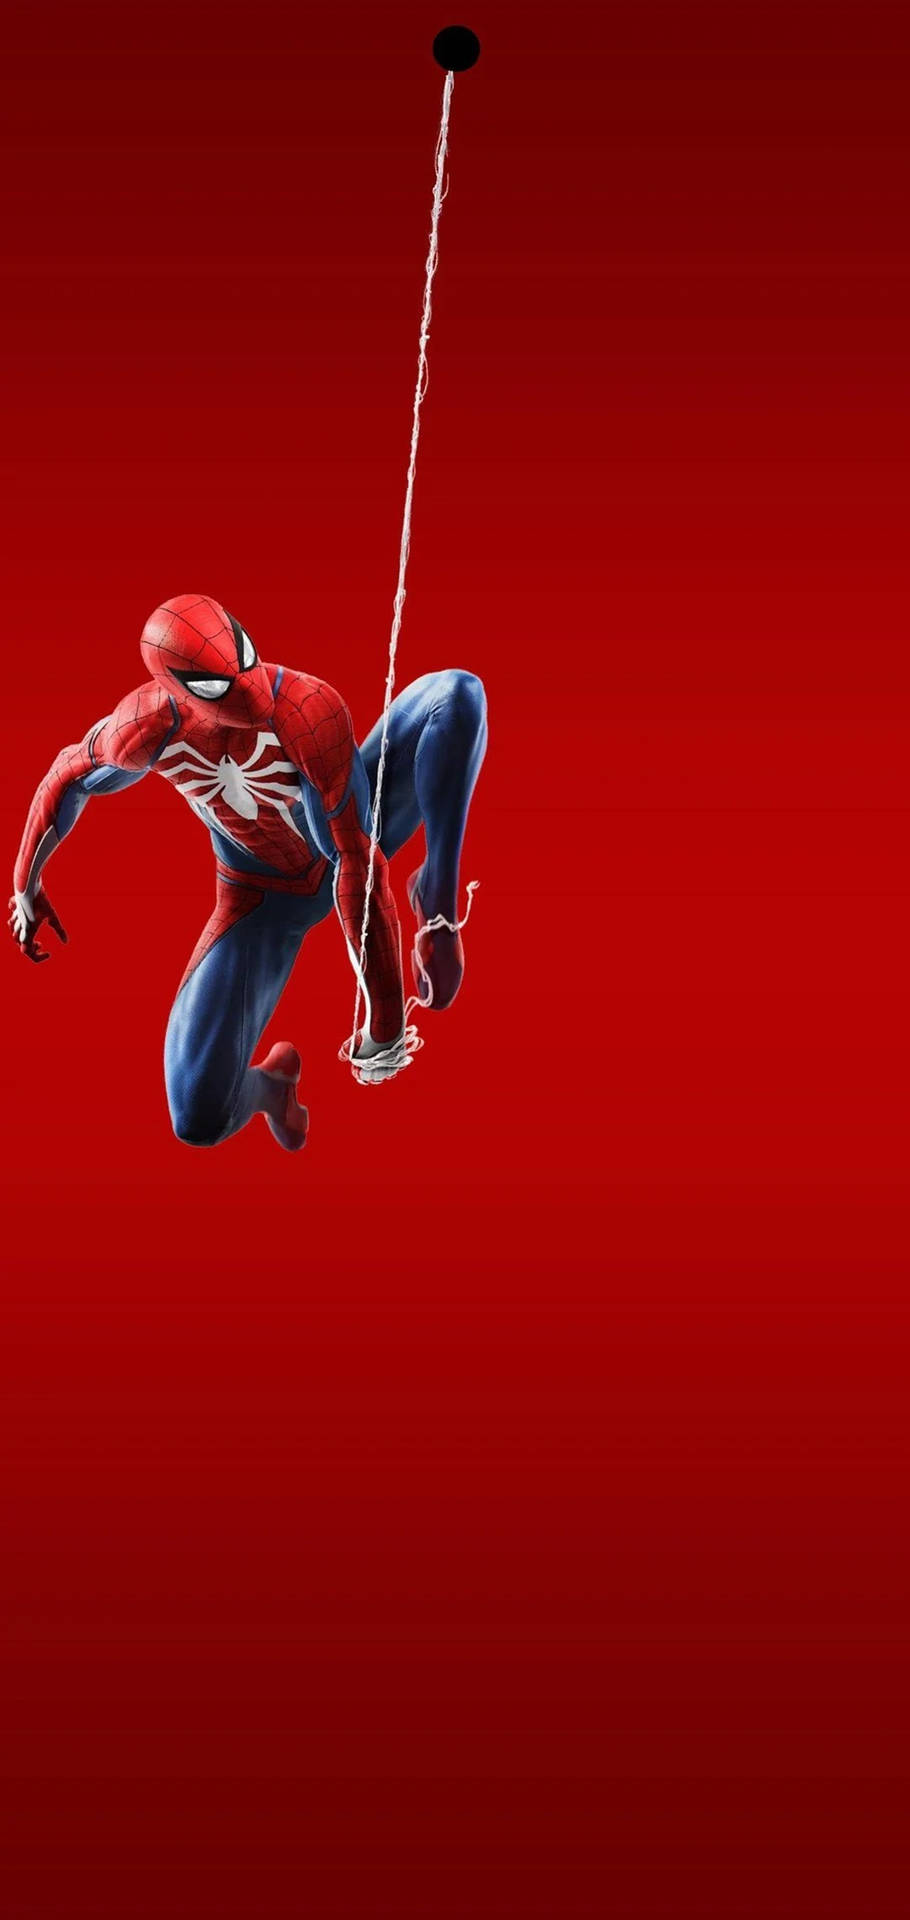 Spiderman Releasing Web Punch Hole 4k Background